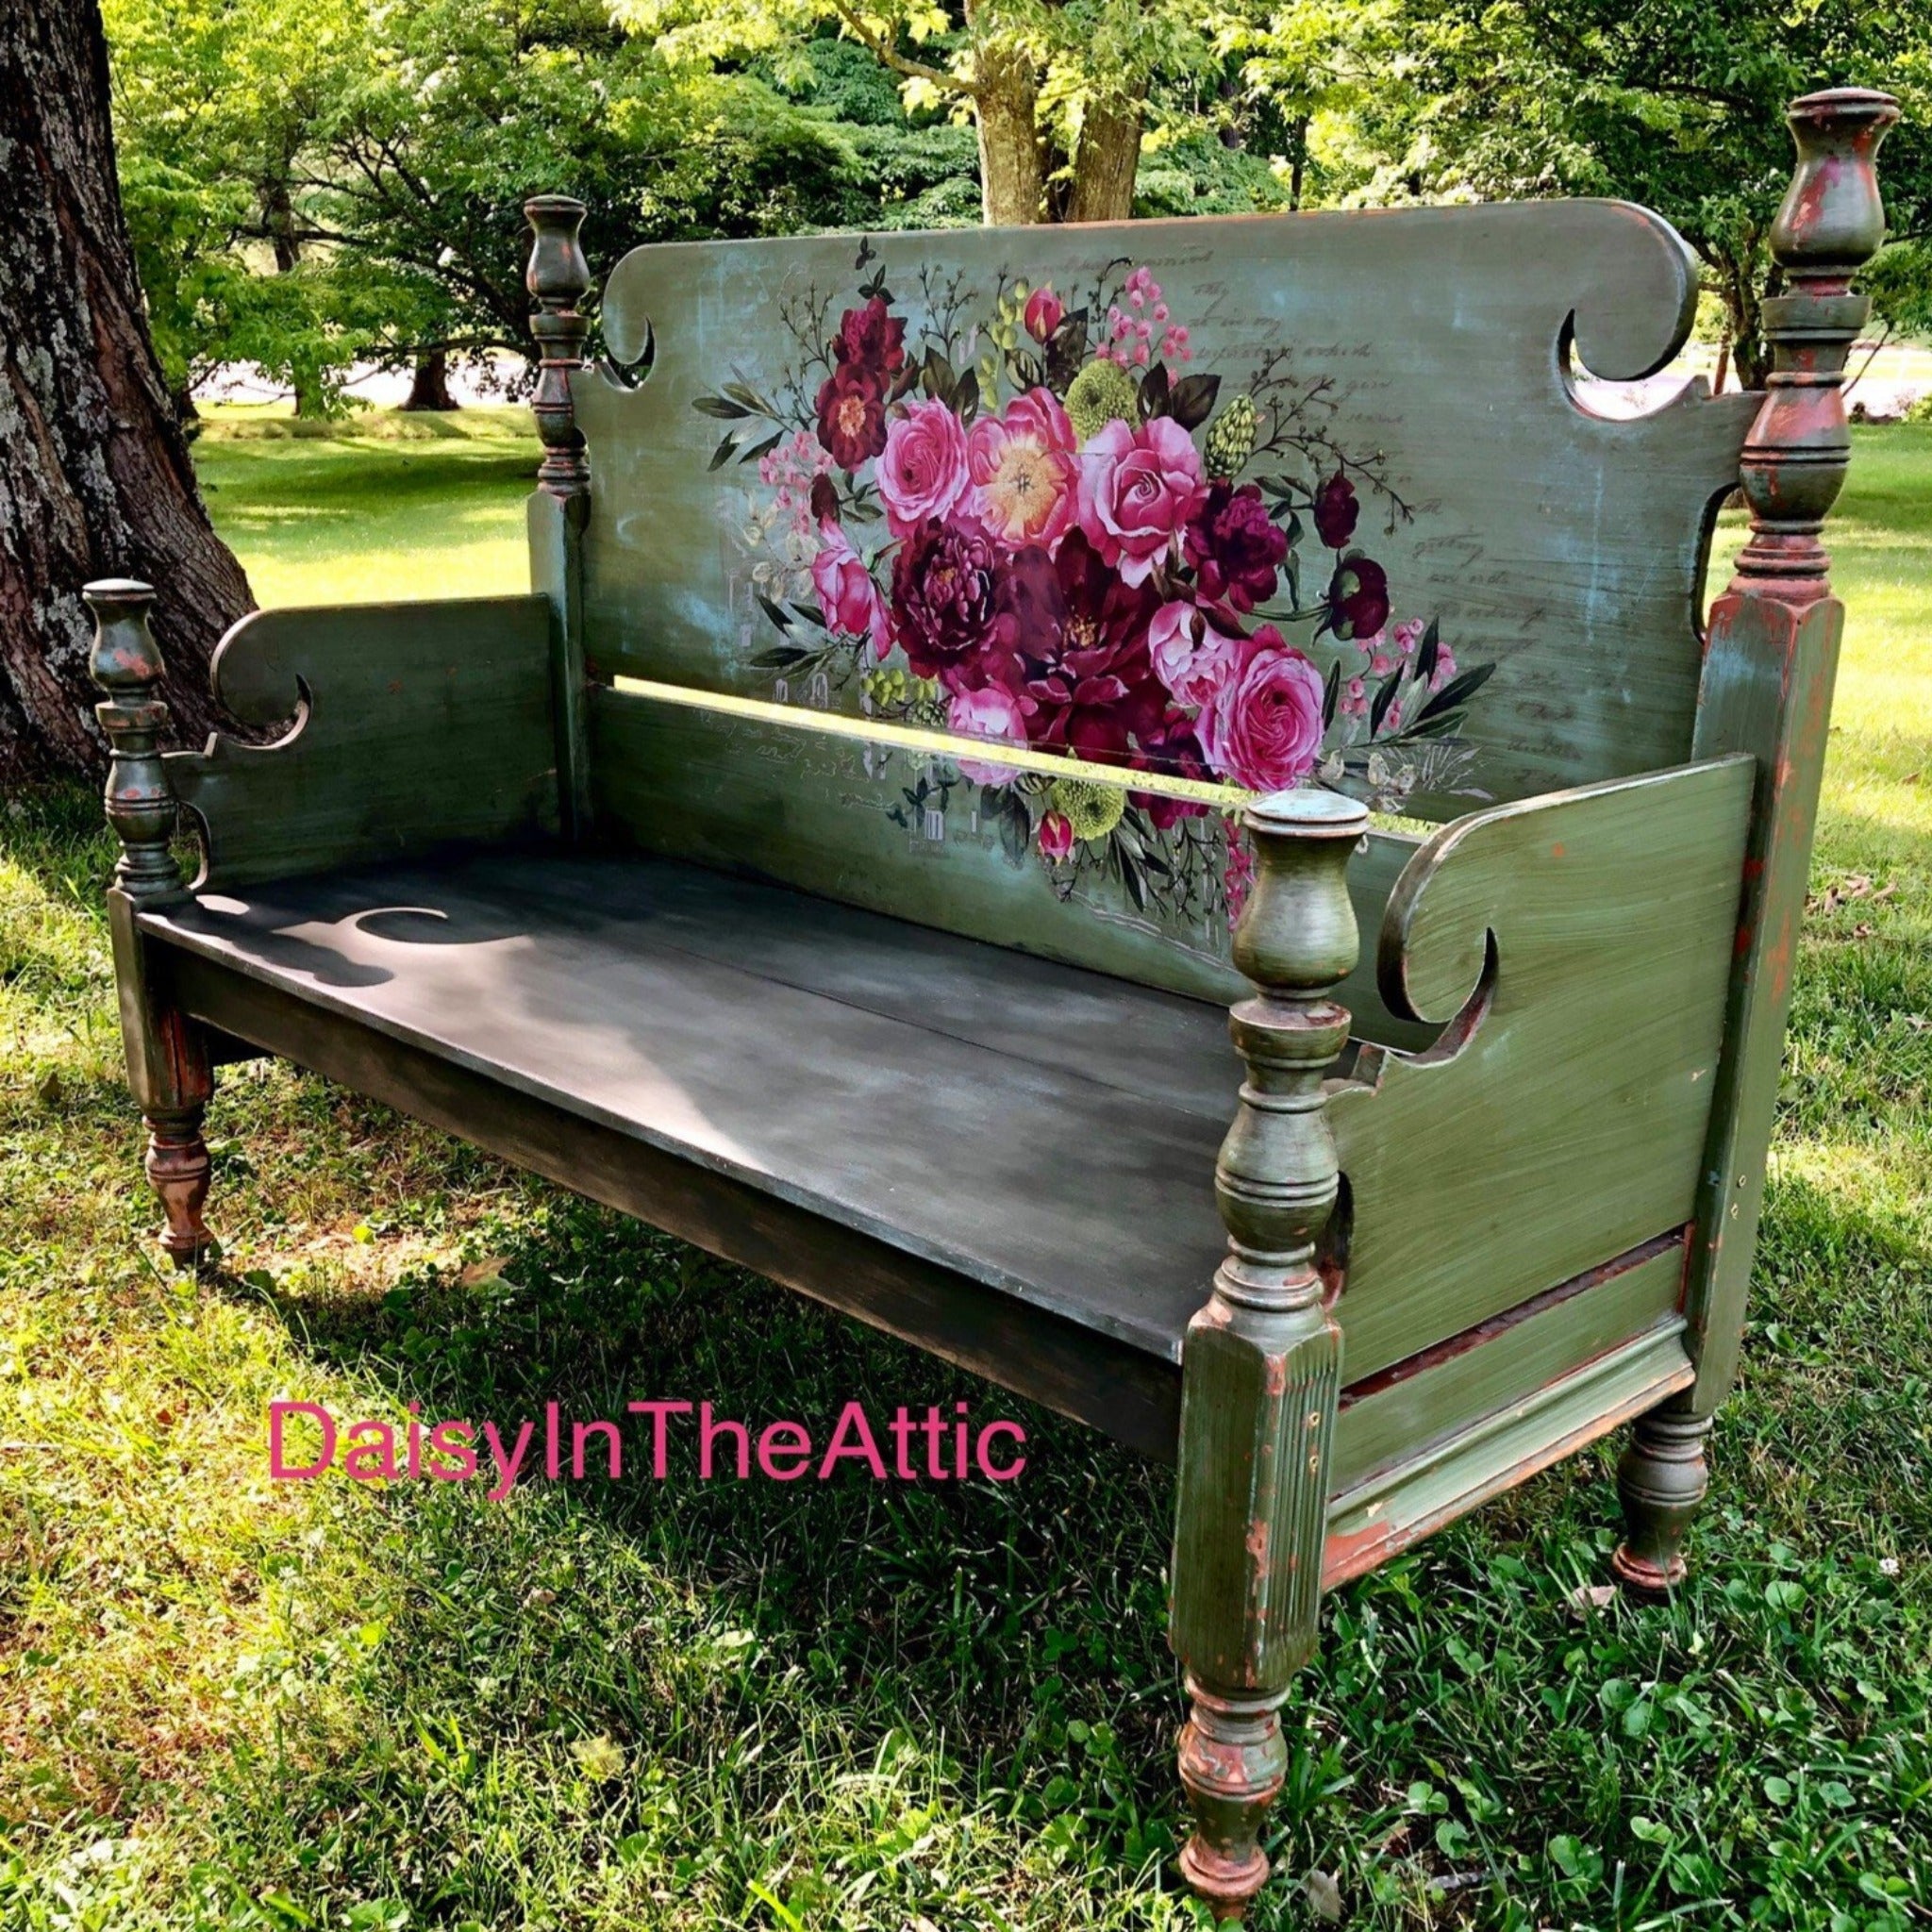 A vintage wood bench refurbished by Daisy In The Attic is painted a distressed olive green and features ReDesign with Prima's Royal Burgundy transfer on the seat back.